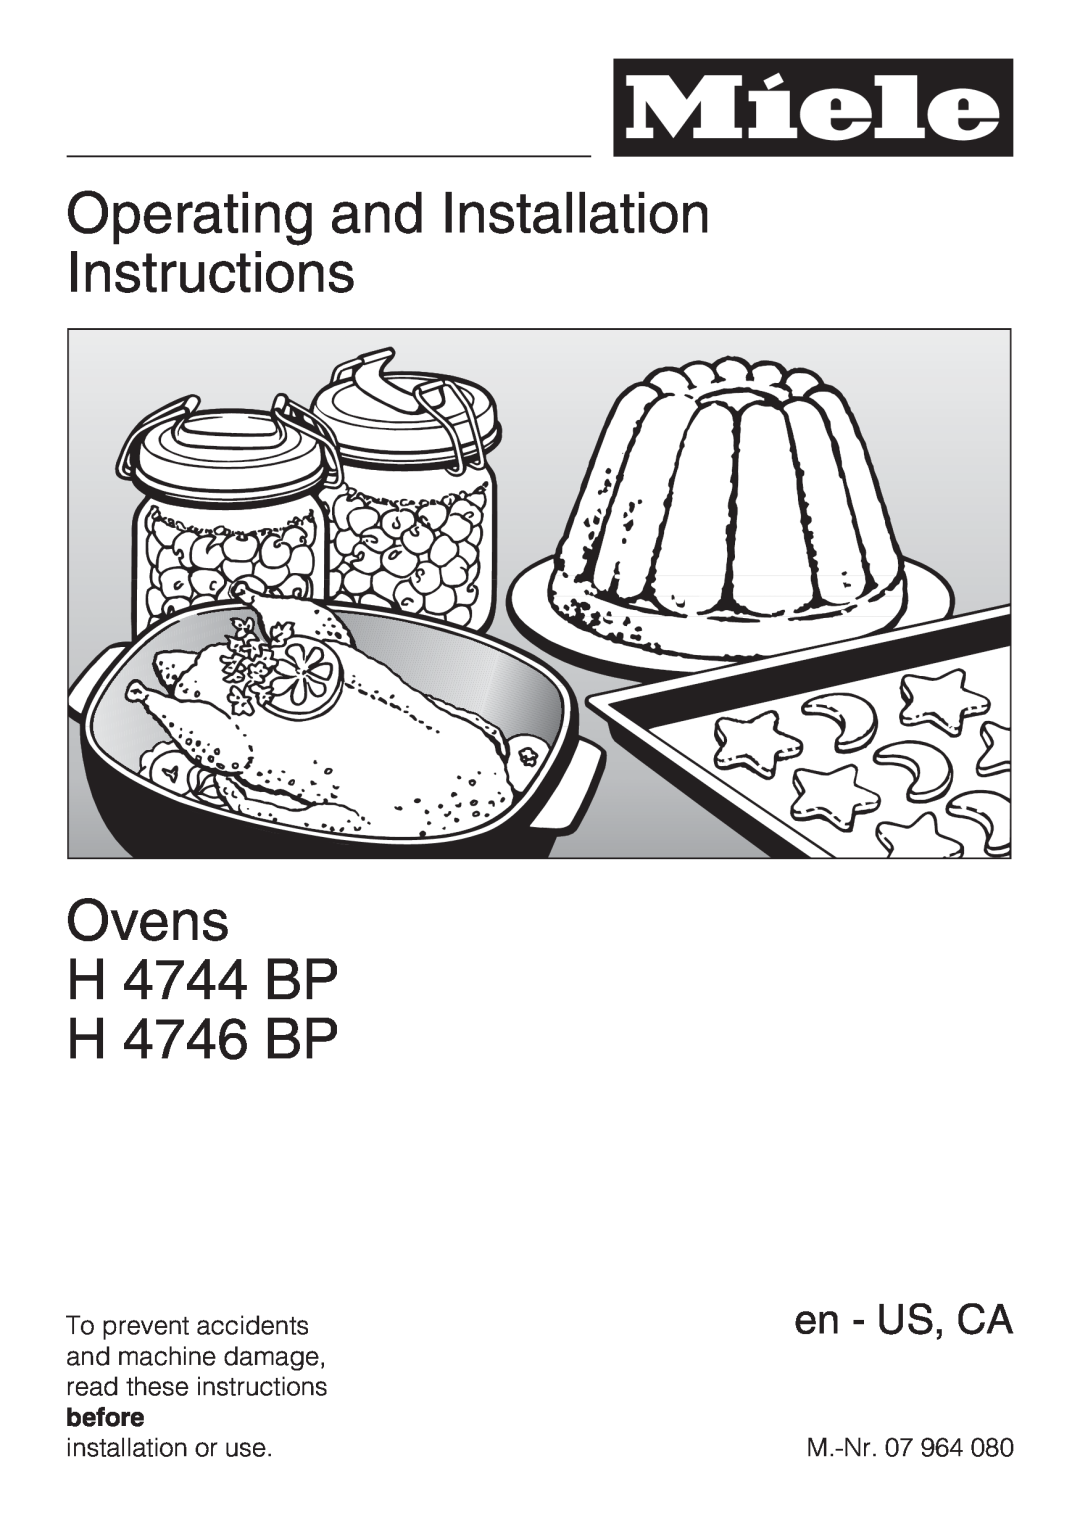 Miele installation instructions Operating and Installation Instructions Ovens H 4744 BP H 4746 BP, en - US, CA 